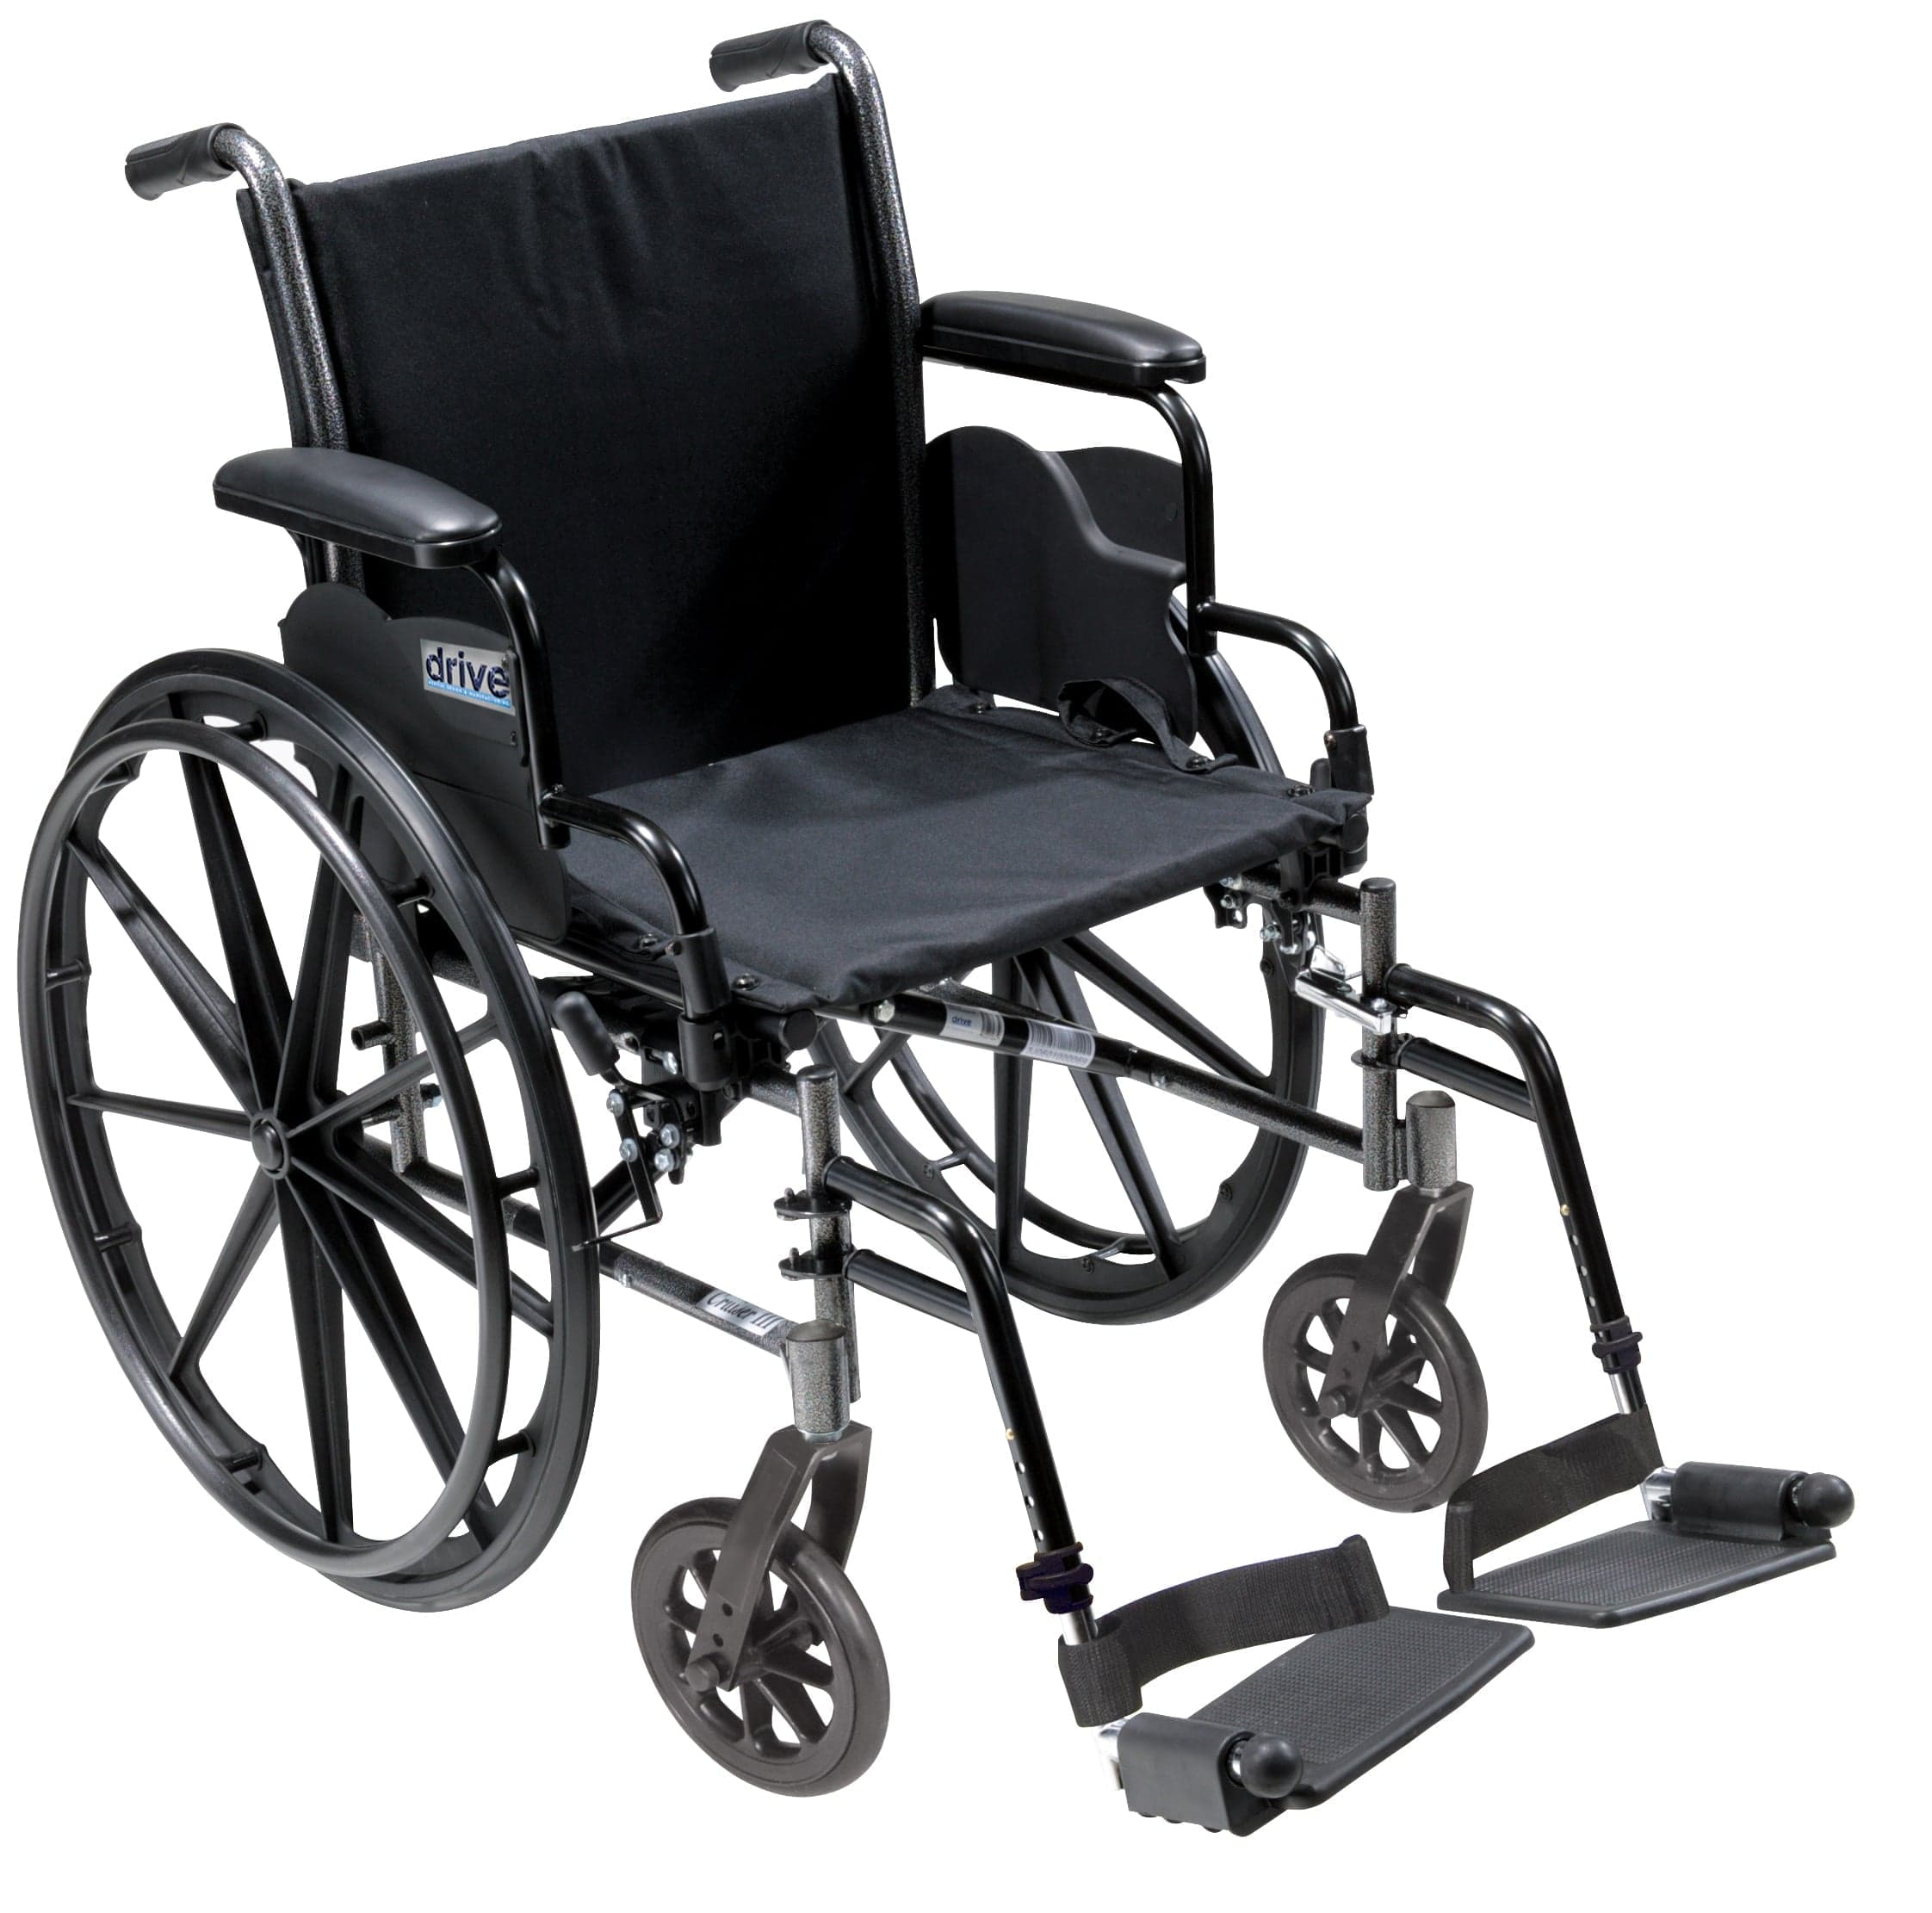 Drive Medical Wheelchairs Flip Back Removable Desk Arms and Swing away Footrests / 20" Seat Drive Medical Cruiser III Light Weight Wheelchair with Flip Back Removable Arms